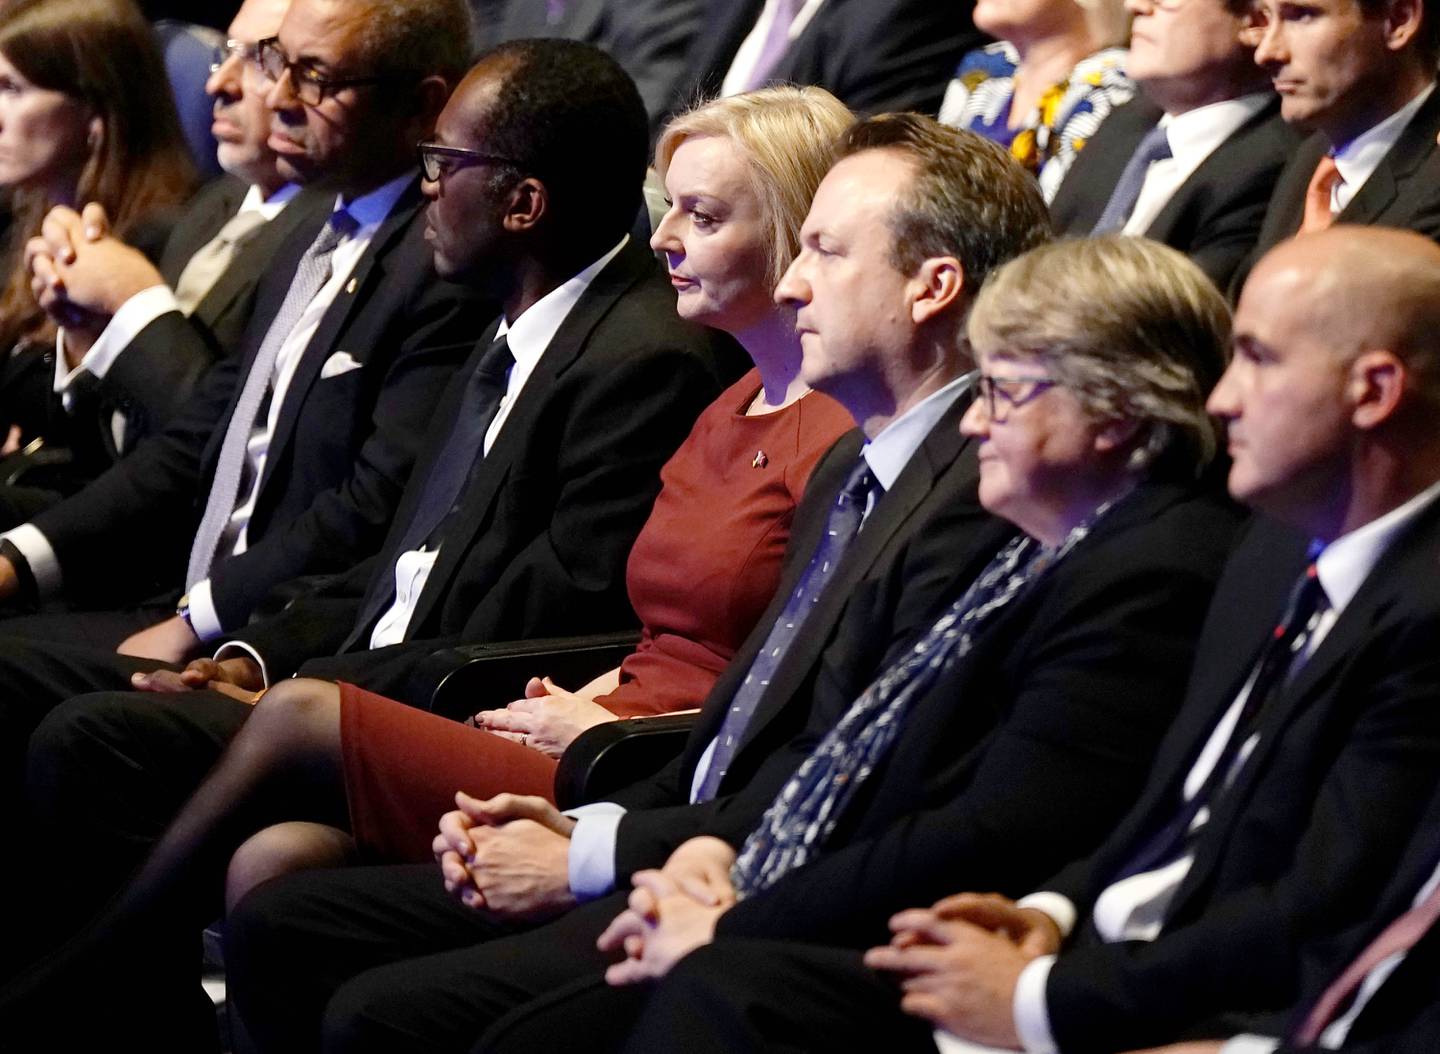 Left to right: Chancellor of the Duchy of Lancaster Nadhim Zahawi, Foreign Secretary James Cleverly, Chancellor of the Exchequer Kwasi Kwarteng, Prime Minister Liz Truss and her husband Hugh O'Leary, Deputy Prime Minister and Health Secretary Therese Coffey and Conservative party chairman Jake Berry, in Birmingham, on October 2.